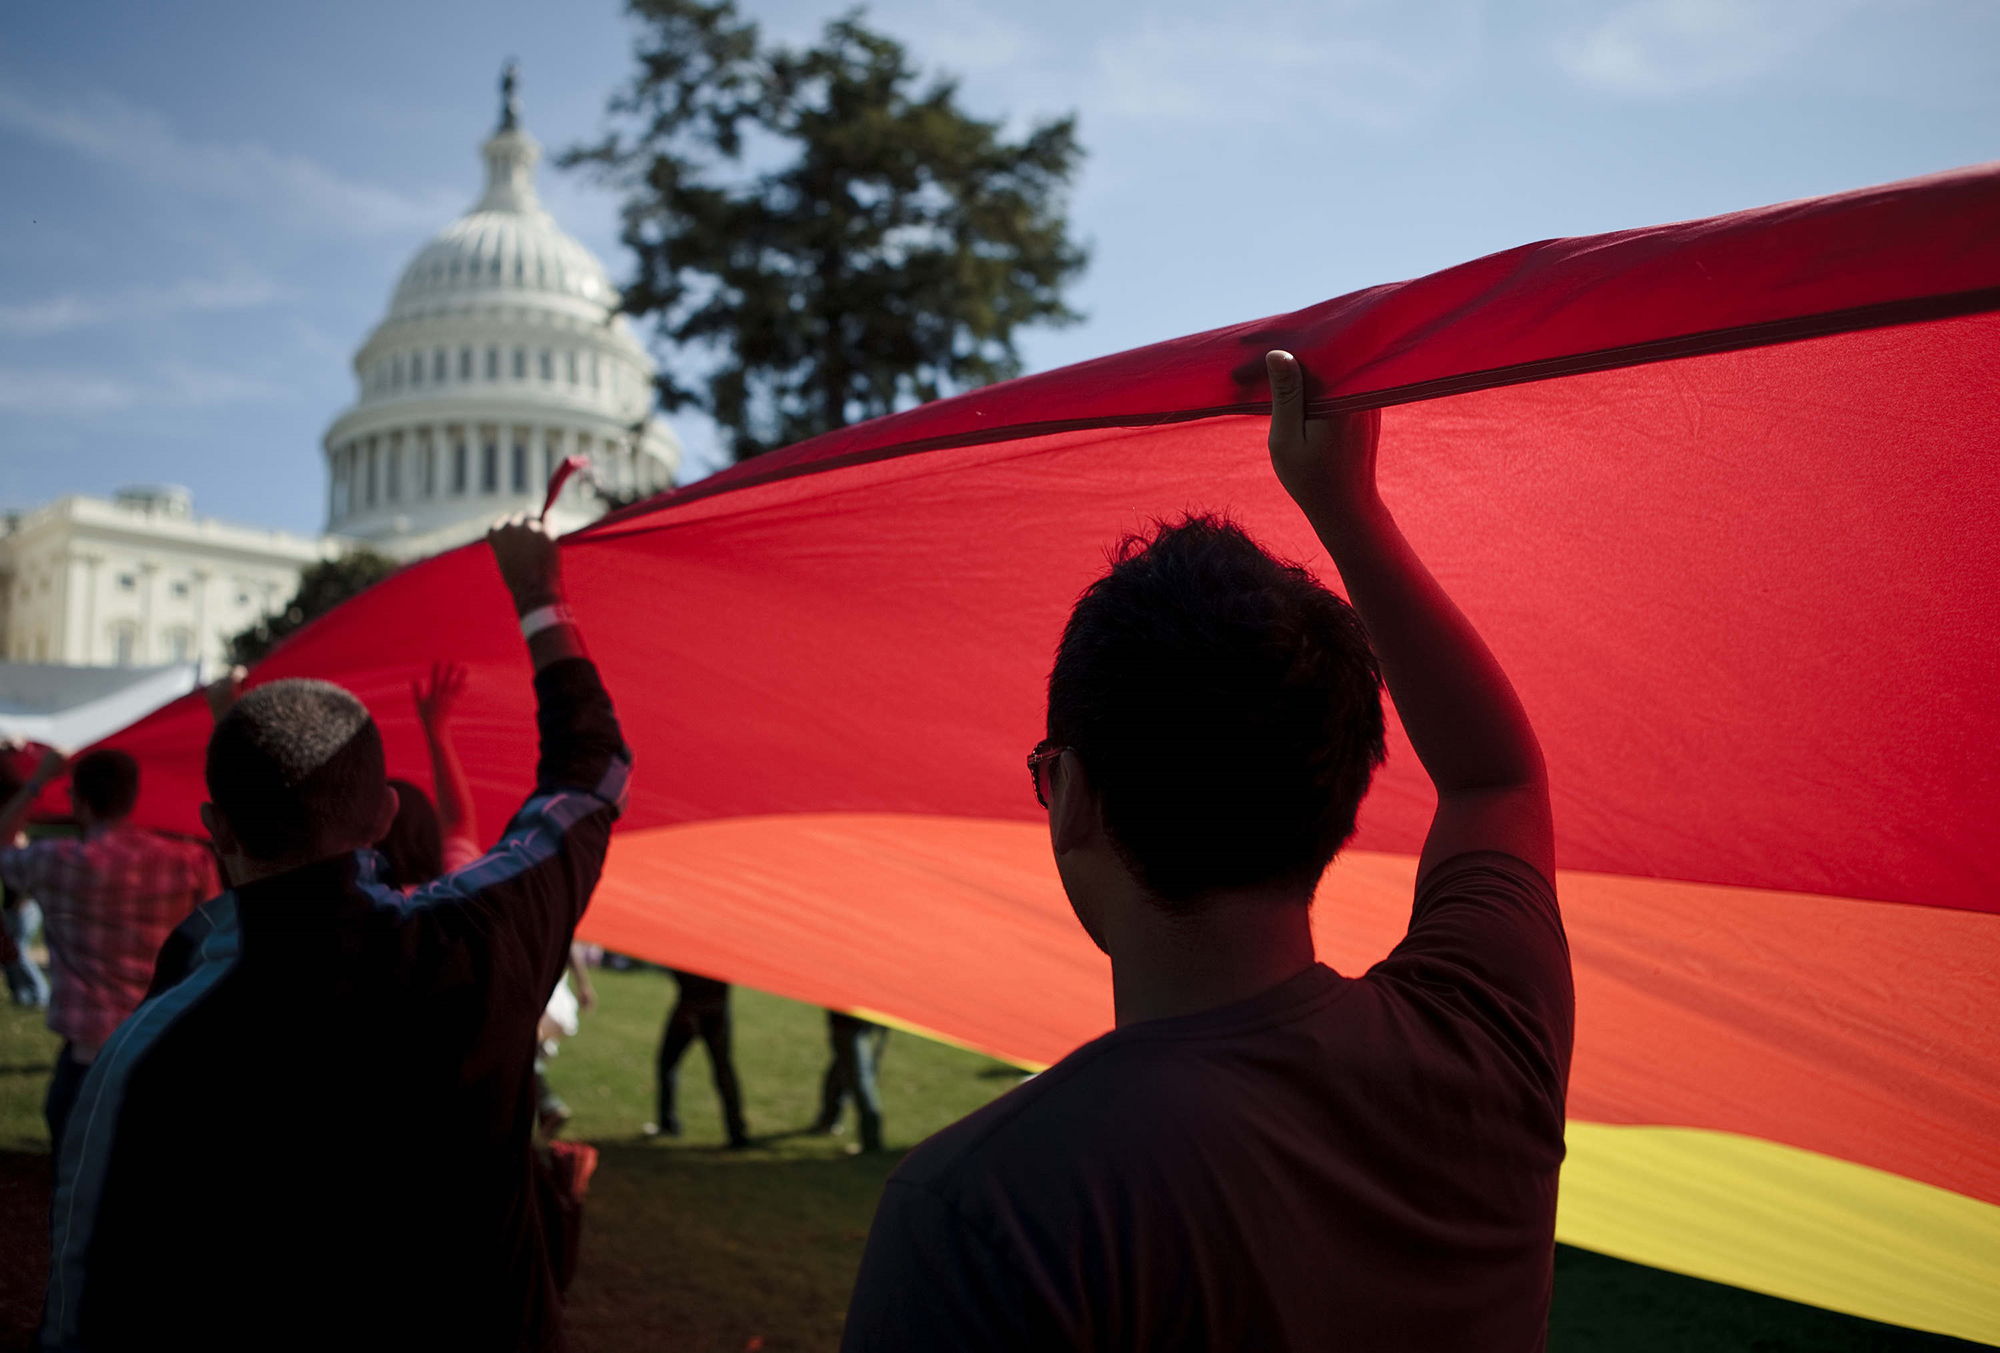 PHOTO: Activists carry a rainbow flag on the West Lawn of the US Capitol Building during a protest Oct. 11, 2009.  